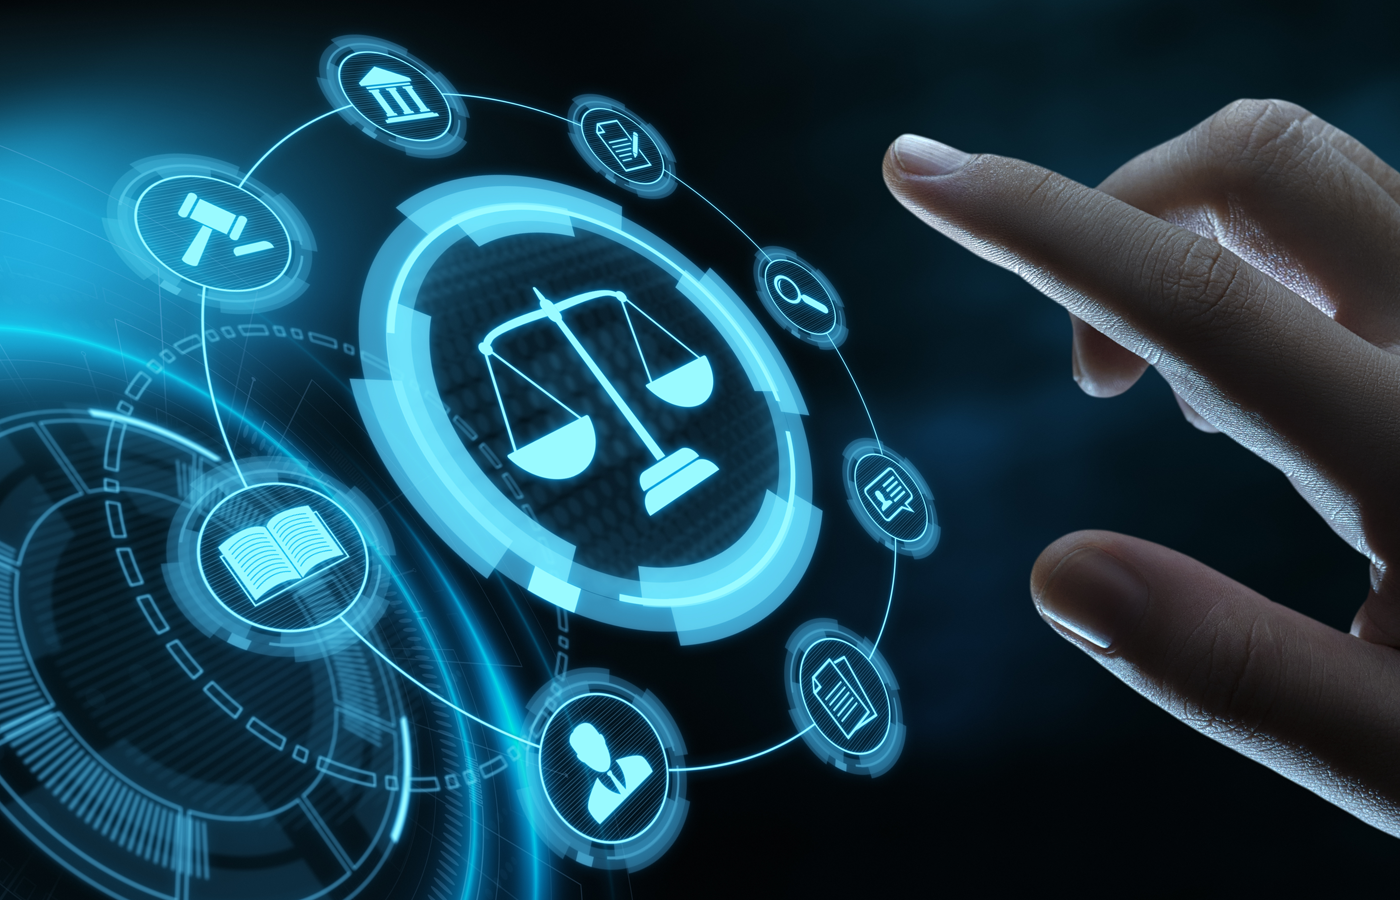 Hand interacting with virtual legal-related icons.